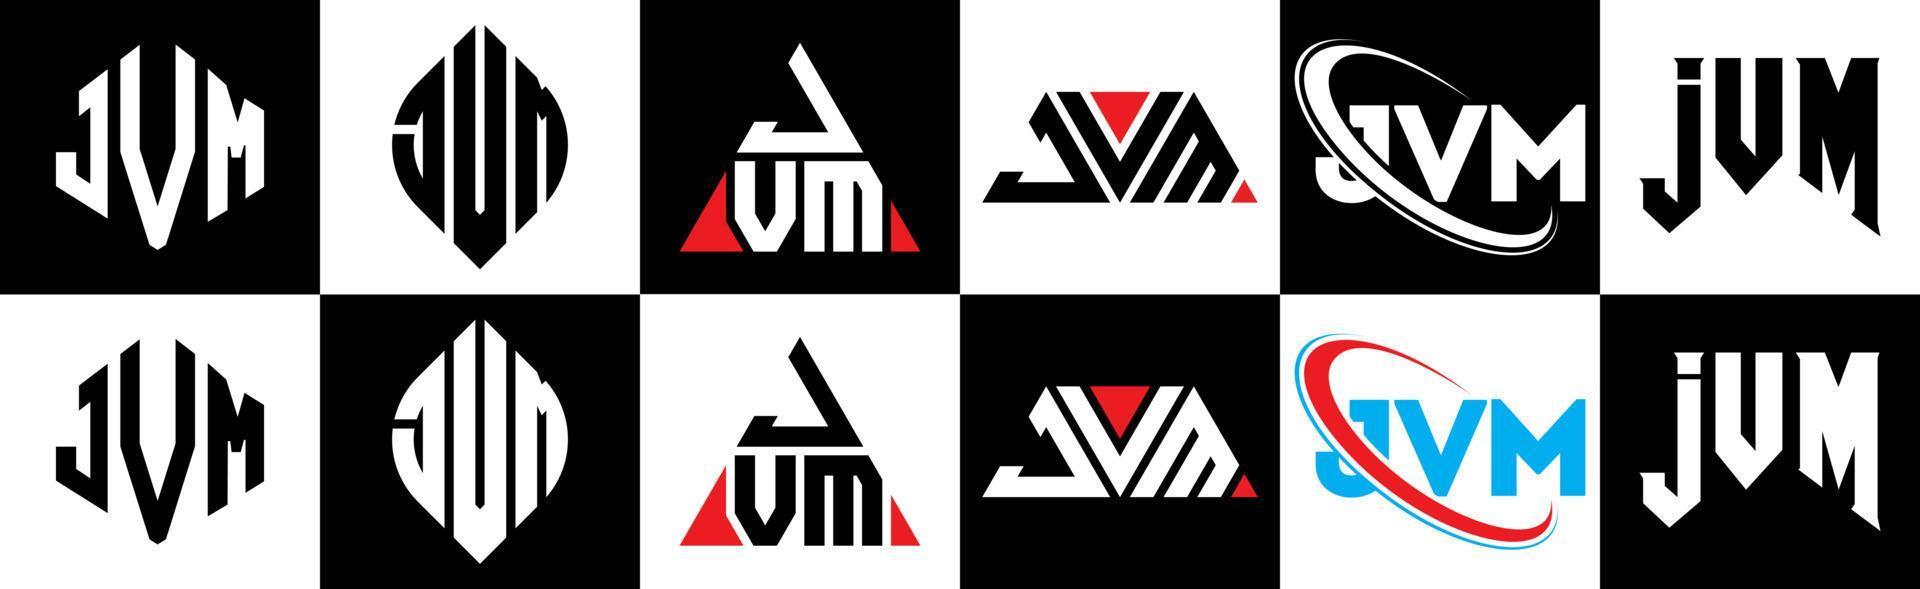 JVM letter logo design in six style. JVM polygon, circle, triangle, hexagon, flat and simple style with black and white color variation letter logo set in one artboard. JVM minimalist and classic logo vector